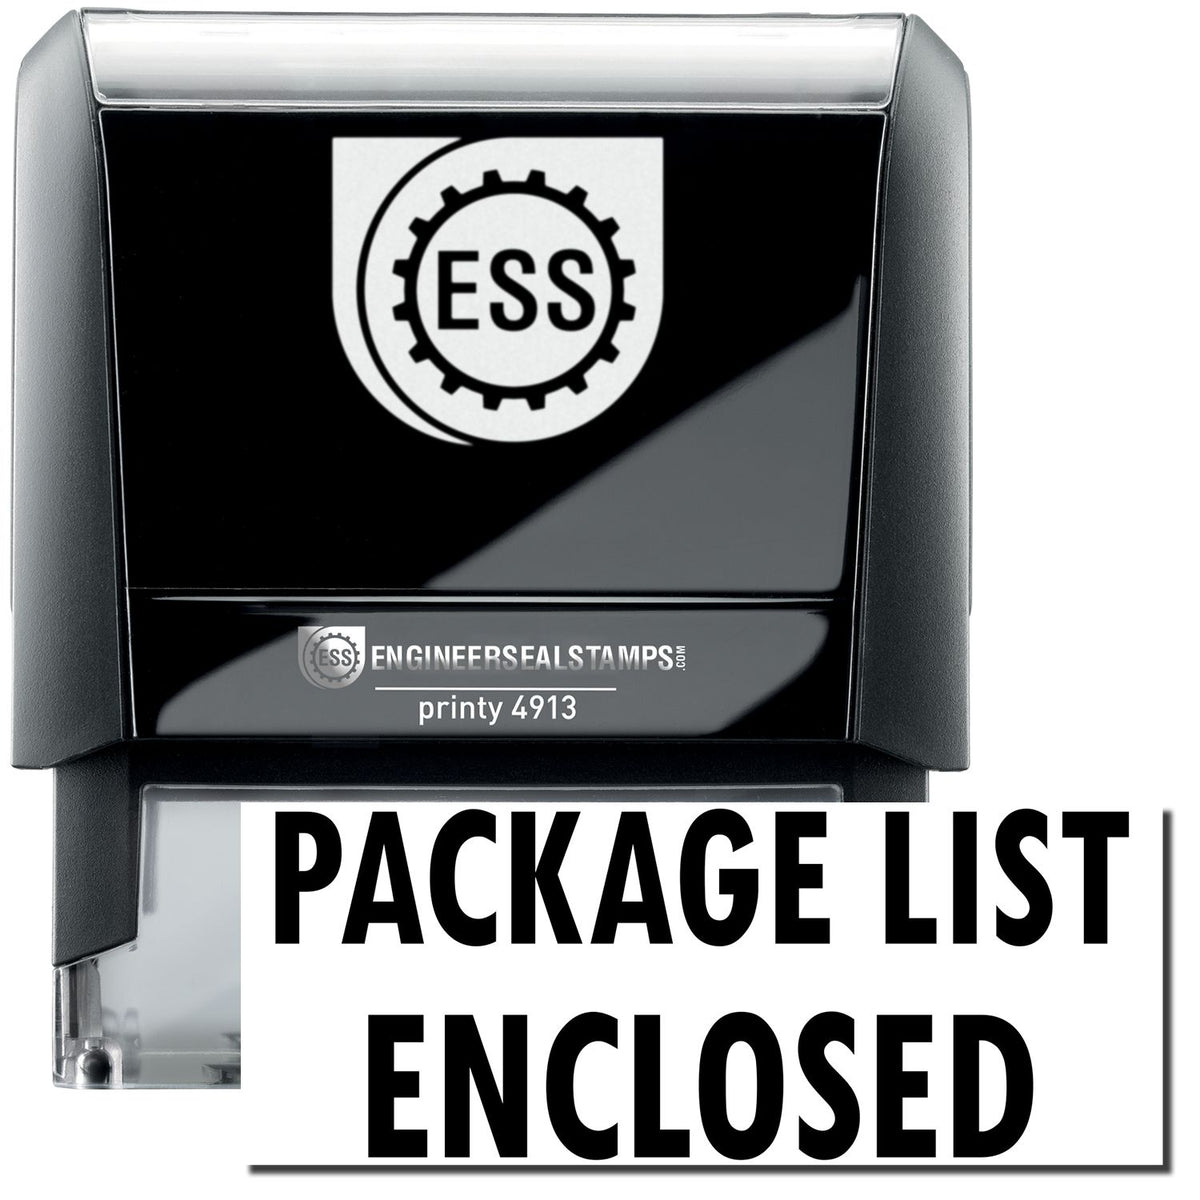 A self-inking stamp with a stamped image showing how the text &quot;PACKAGE LIST ENCLOSED&quot; in a large bold font is displayed by it